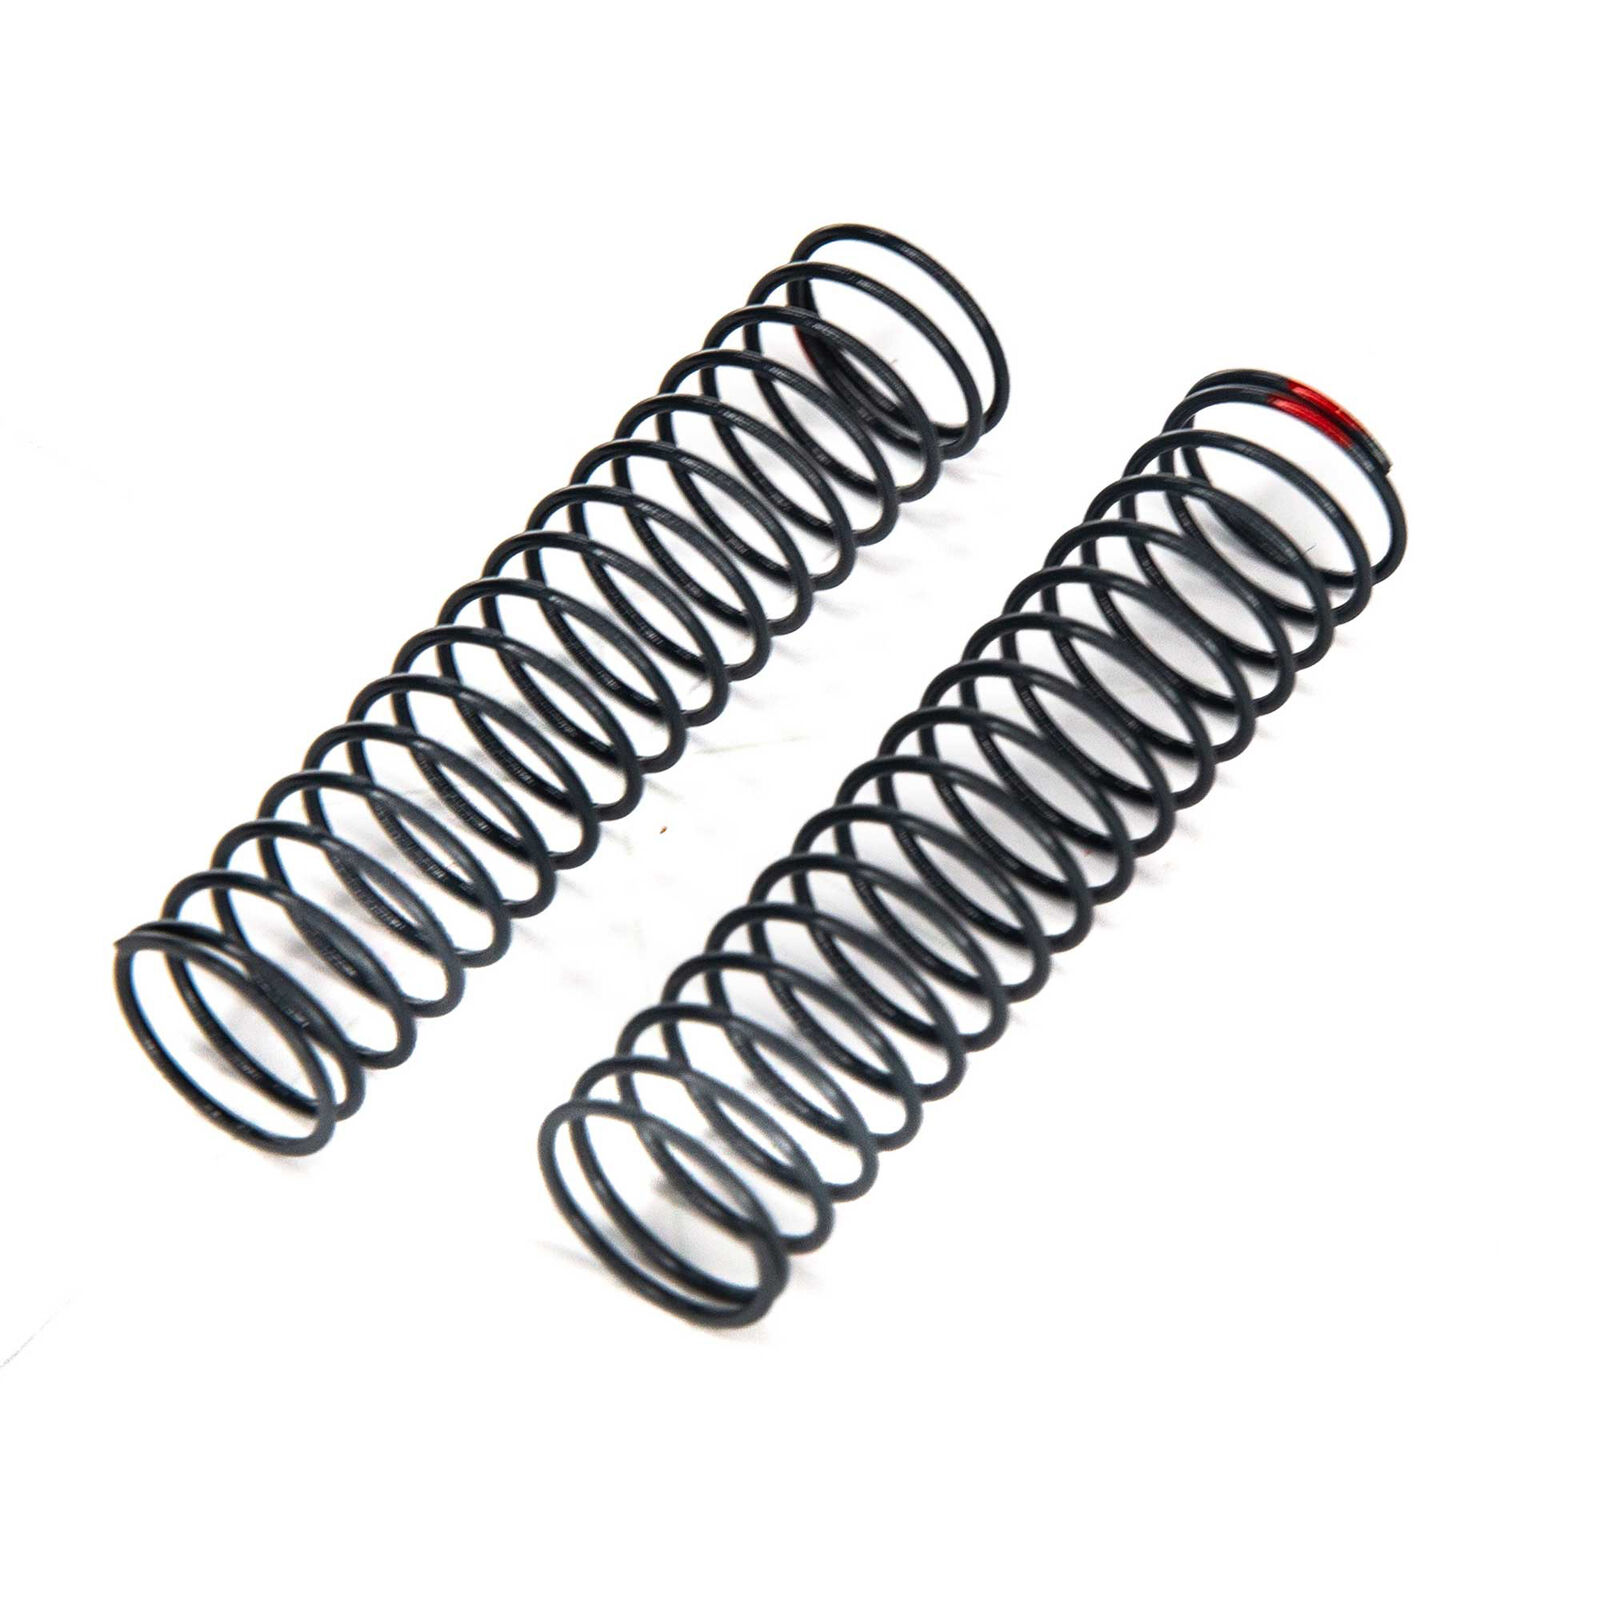 AXIAL Spring 13x62mm 1.3 lbs in Red Soft (2)